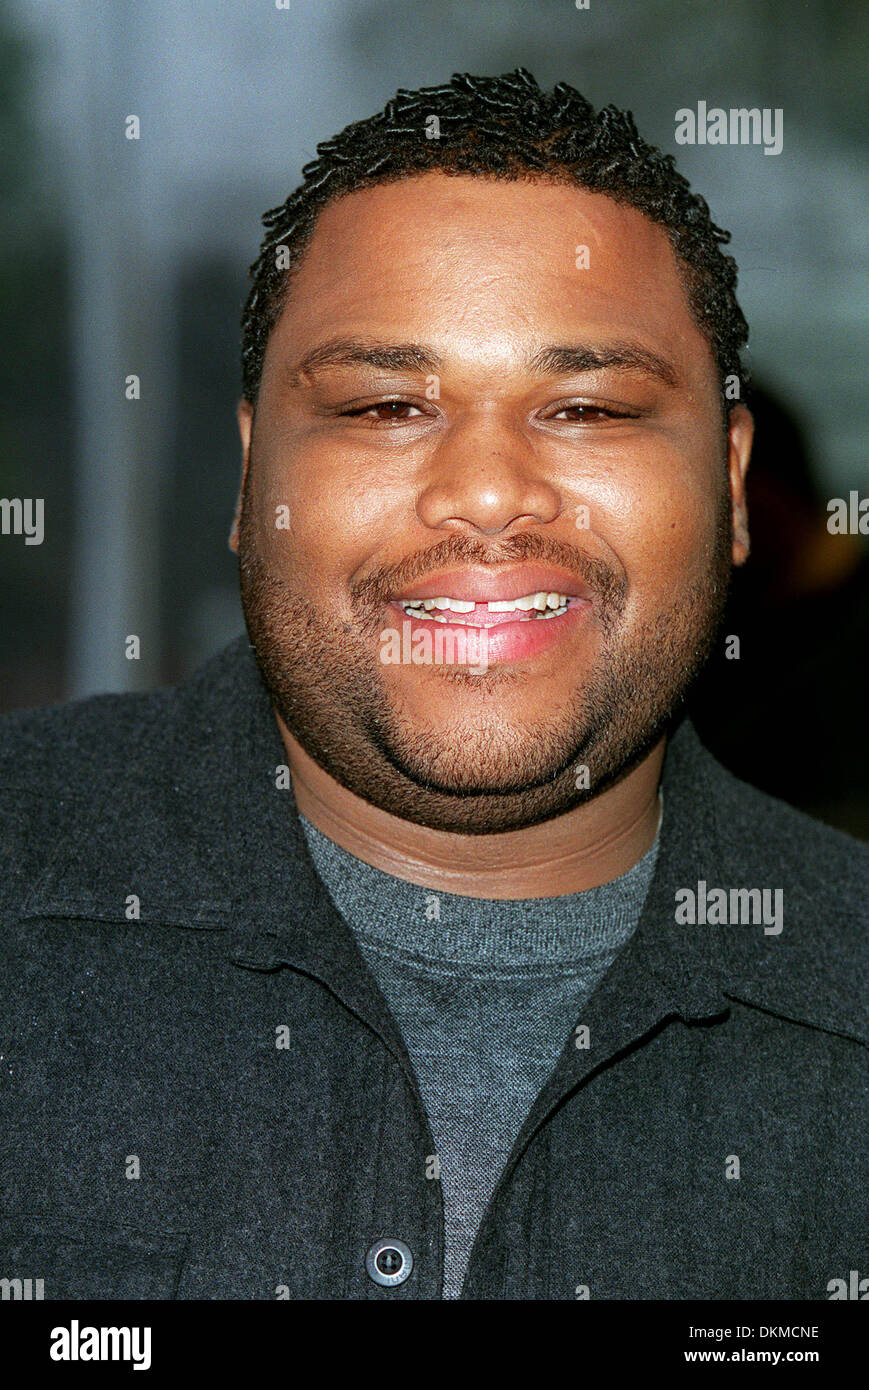 ANTHONY ANDERSON.ACTOR.HOLLYWOOD, LA, USA.25/02/2001.BF66A30 Stock Photo